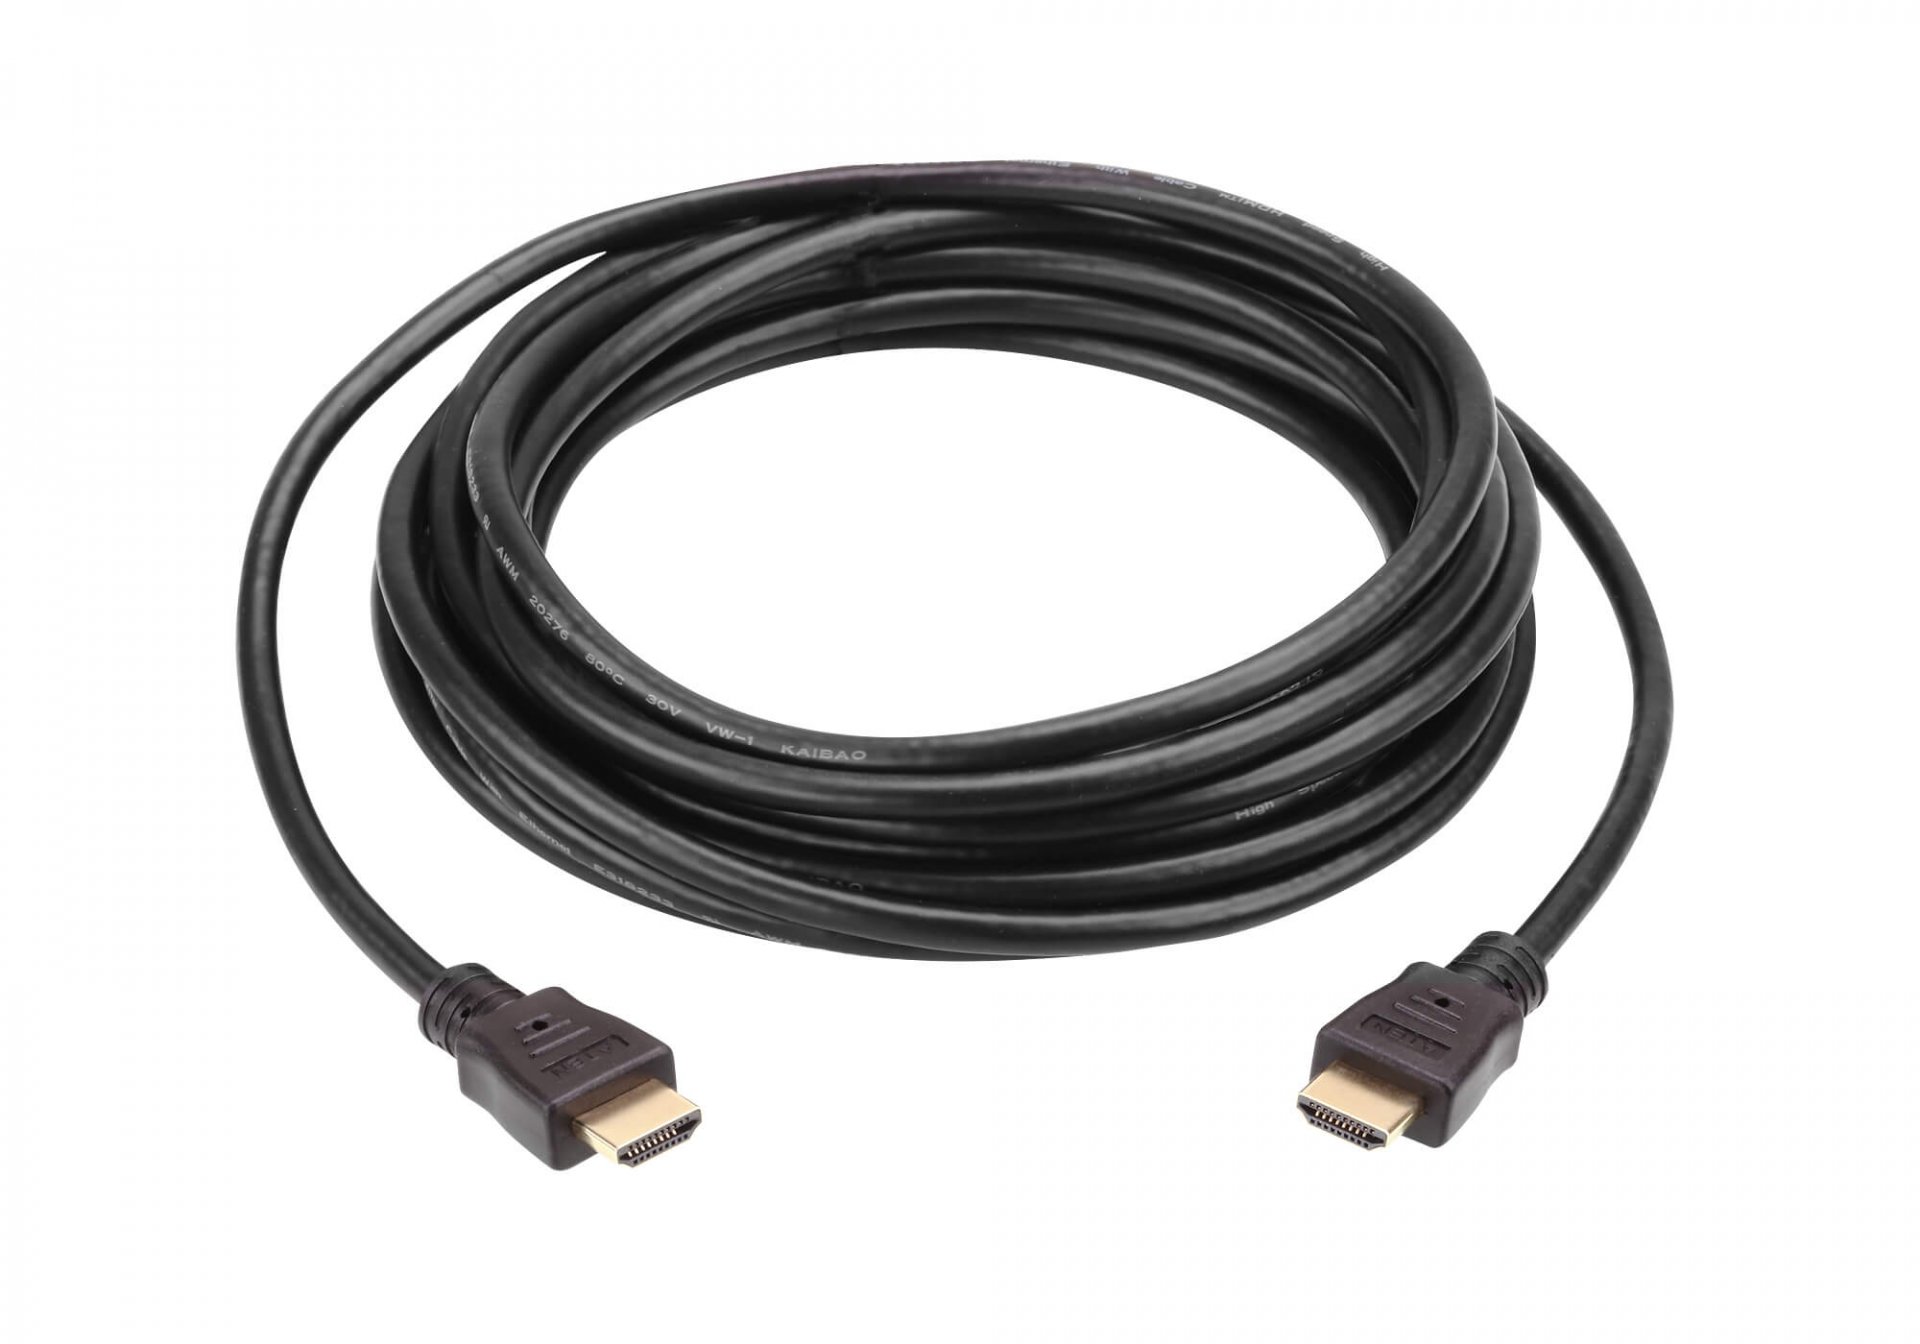 2L-7D10H : 10 m High Speed HDMI Cable with Ethernet